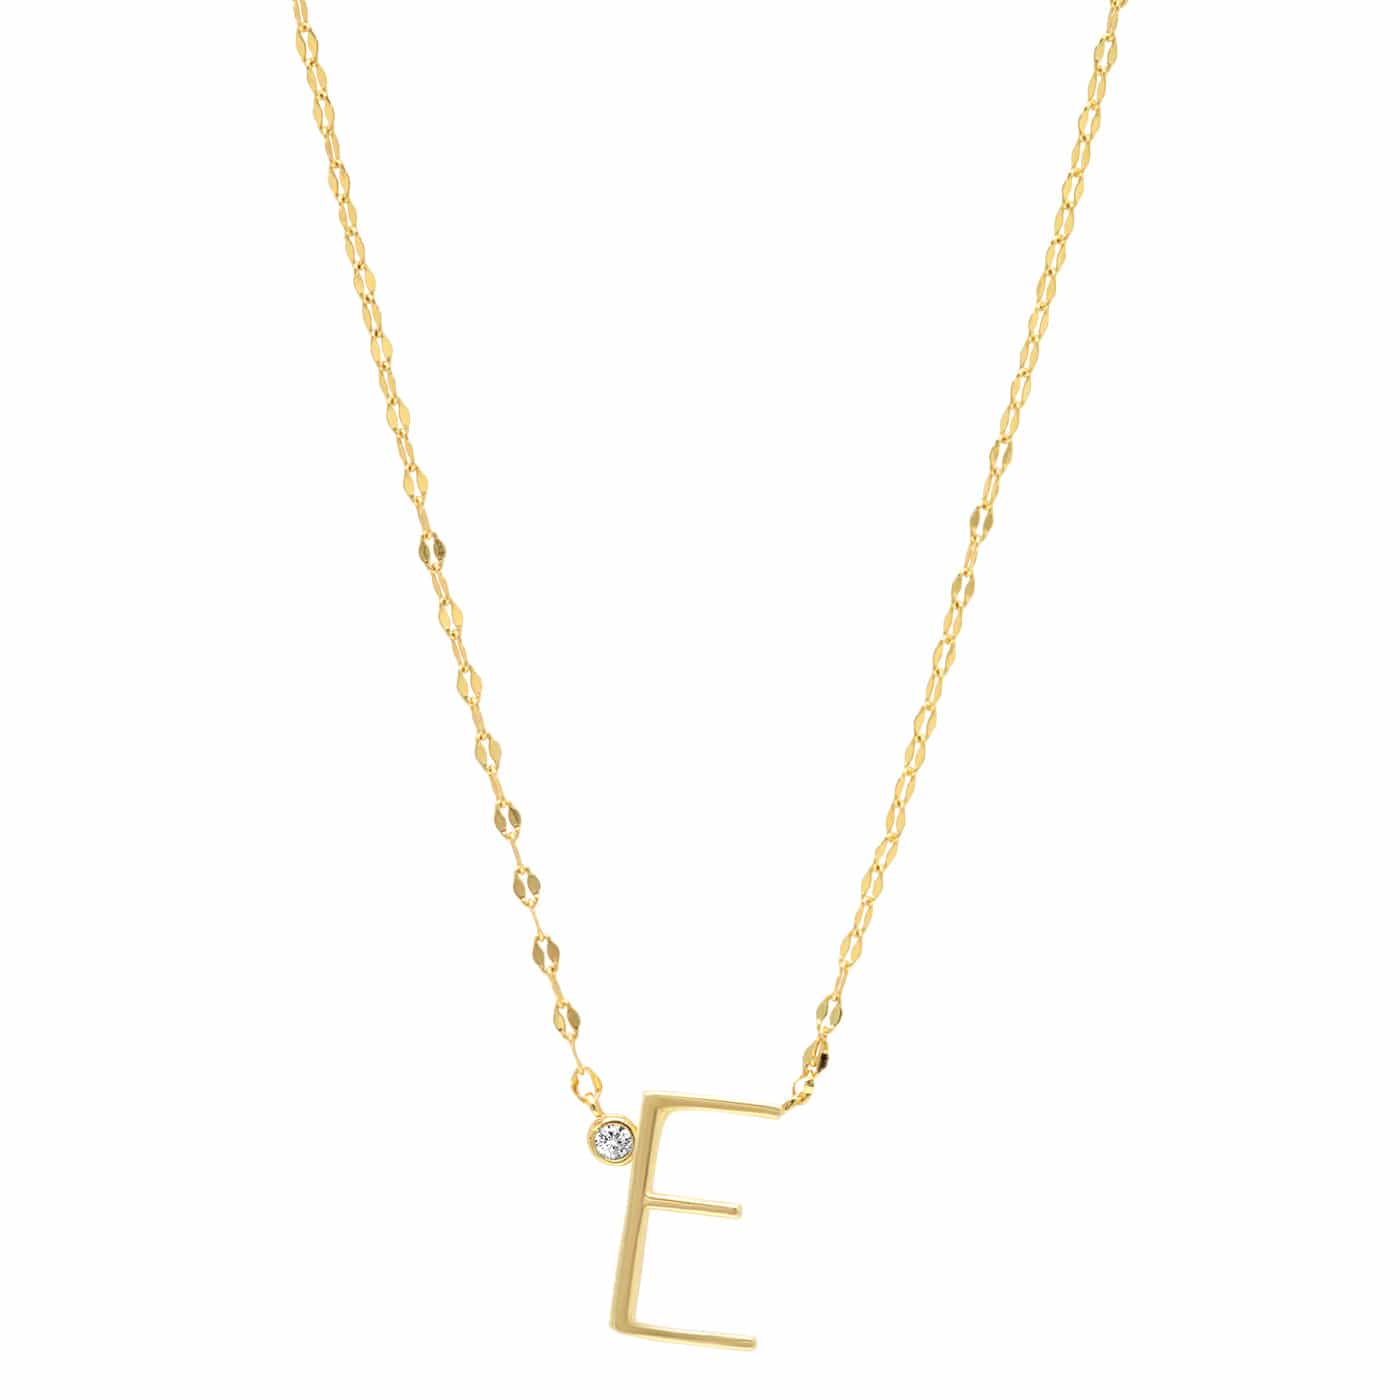 TAI JEWELRY Necklace E Medium Sized Initial Necklace With Cz Accent